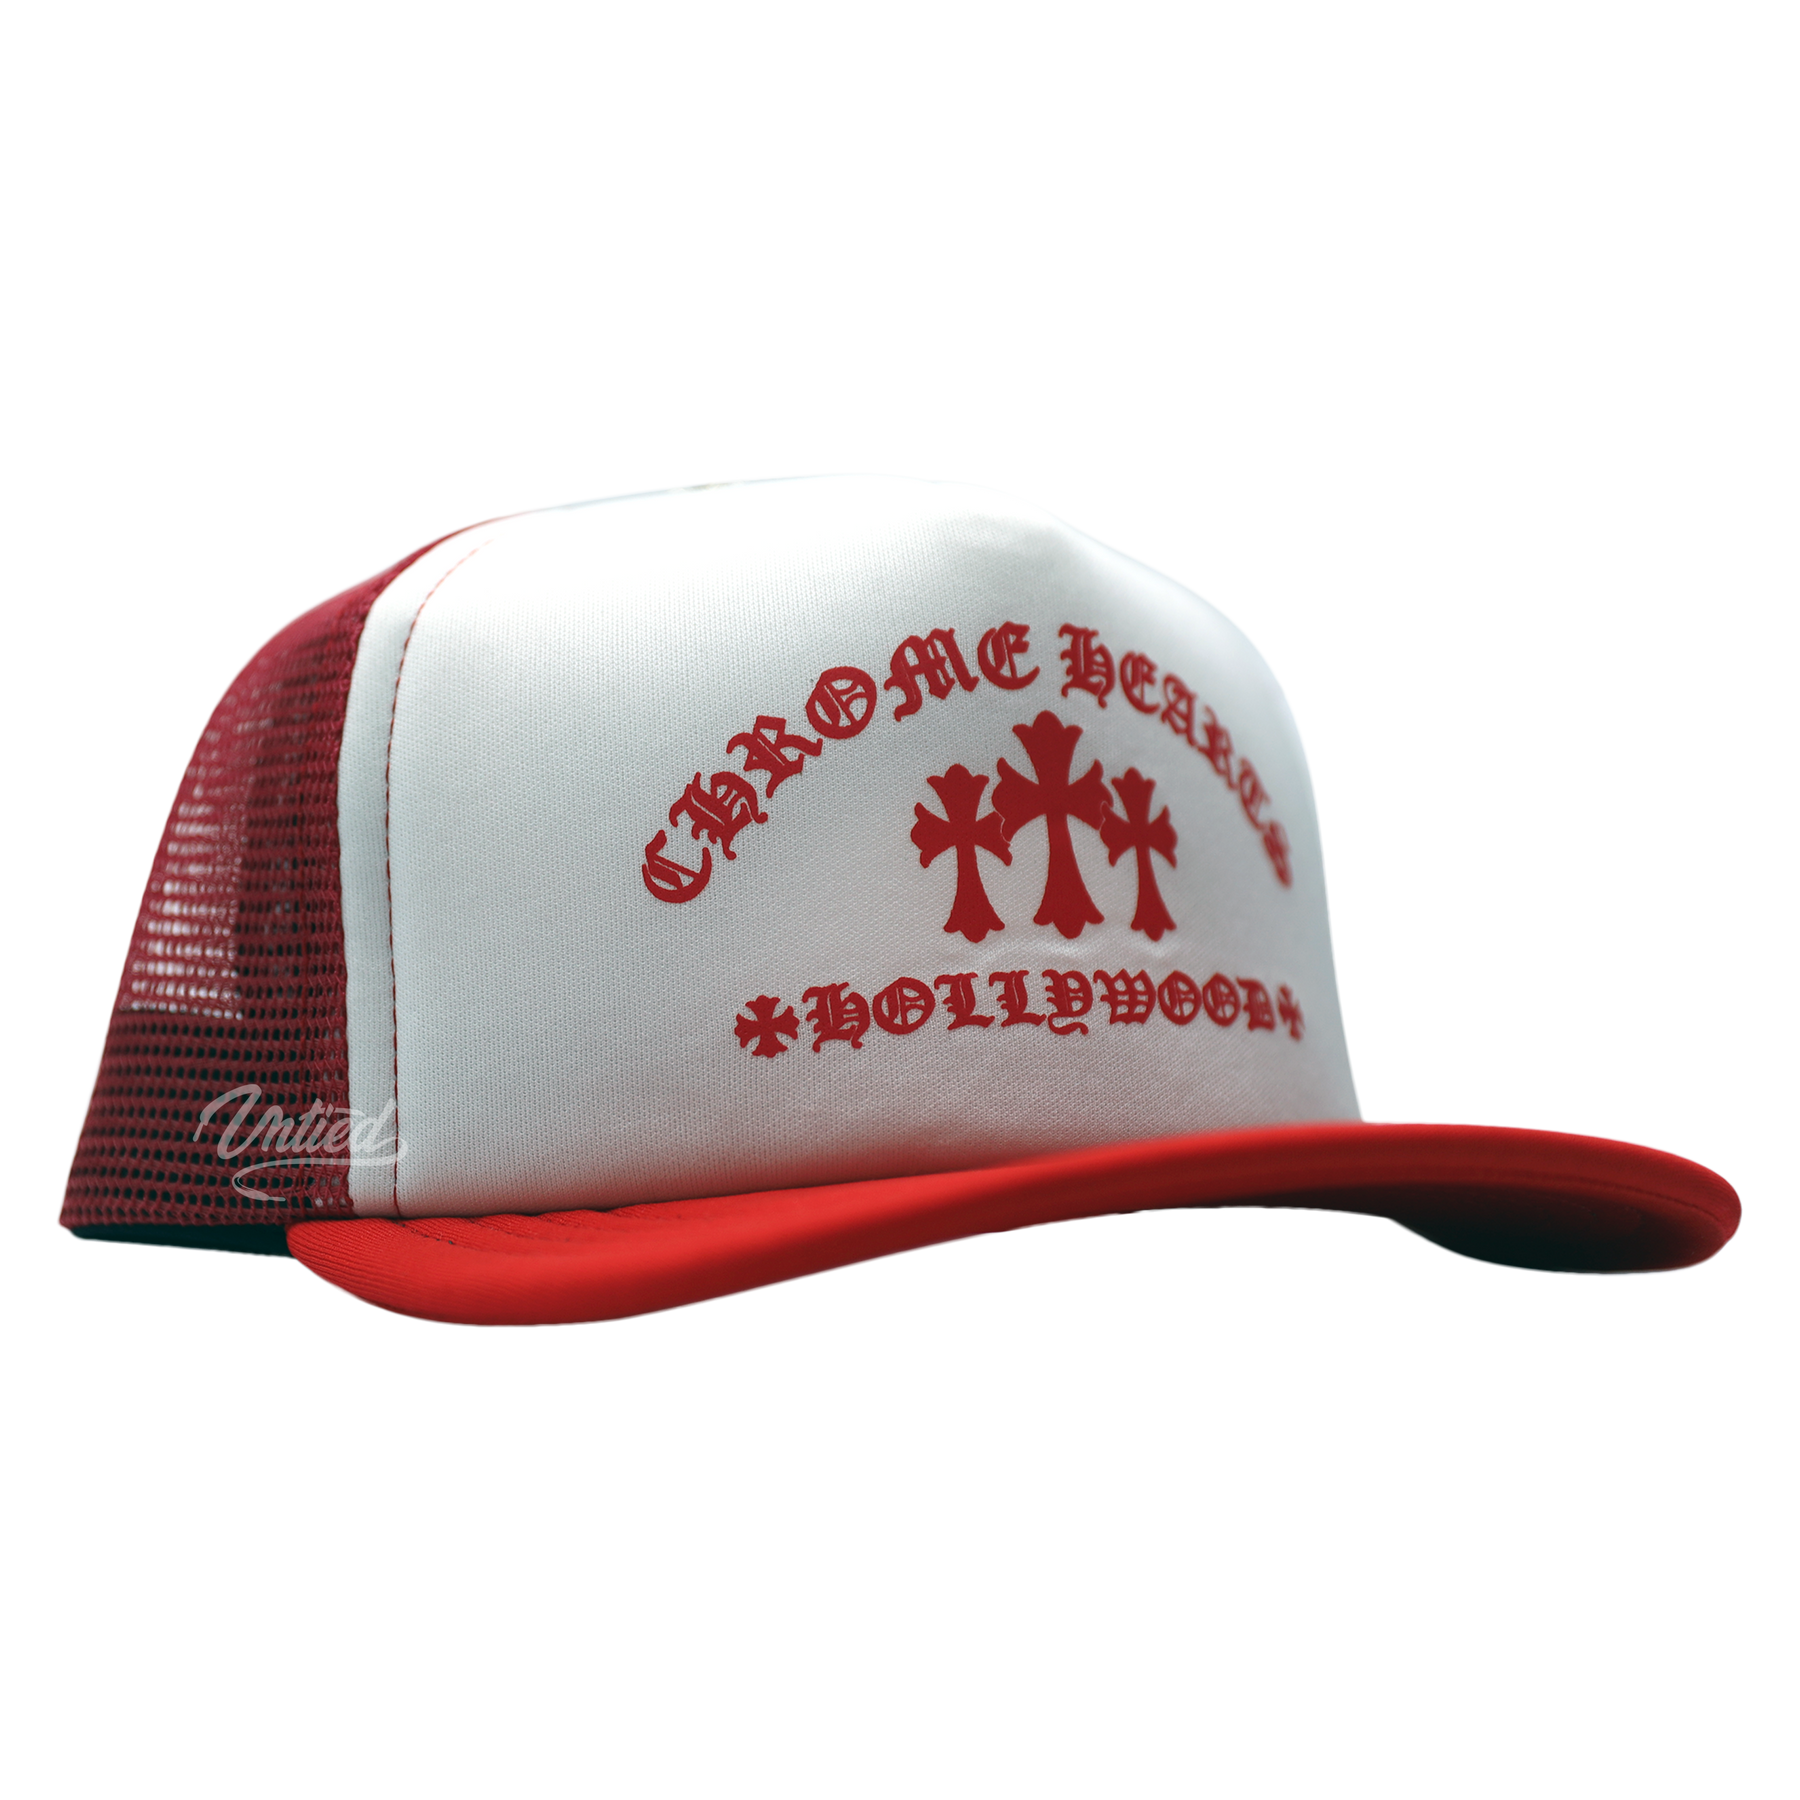 Chrome Hearts Trucker Hat "Red King Taco"